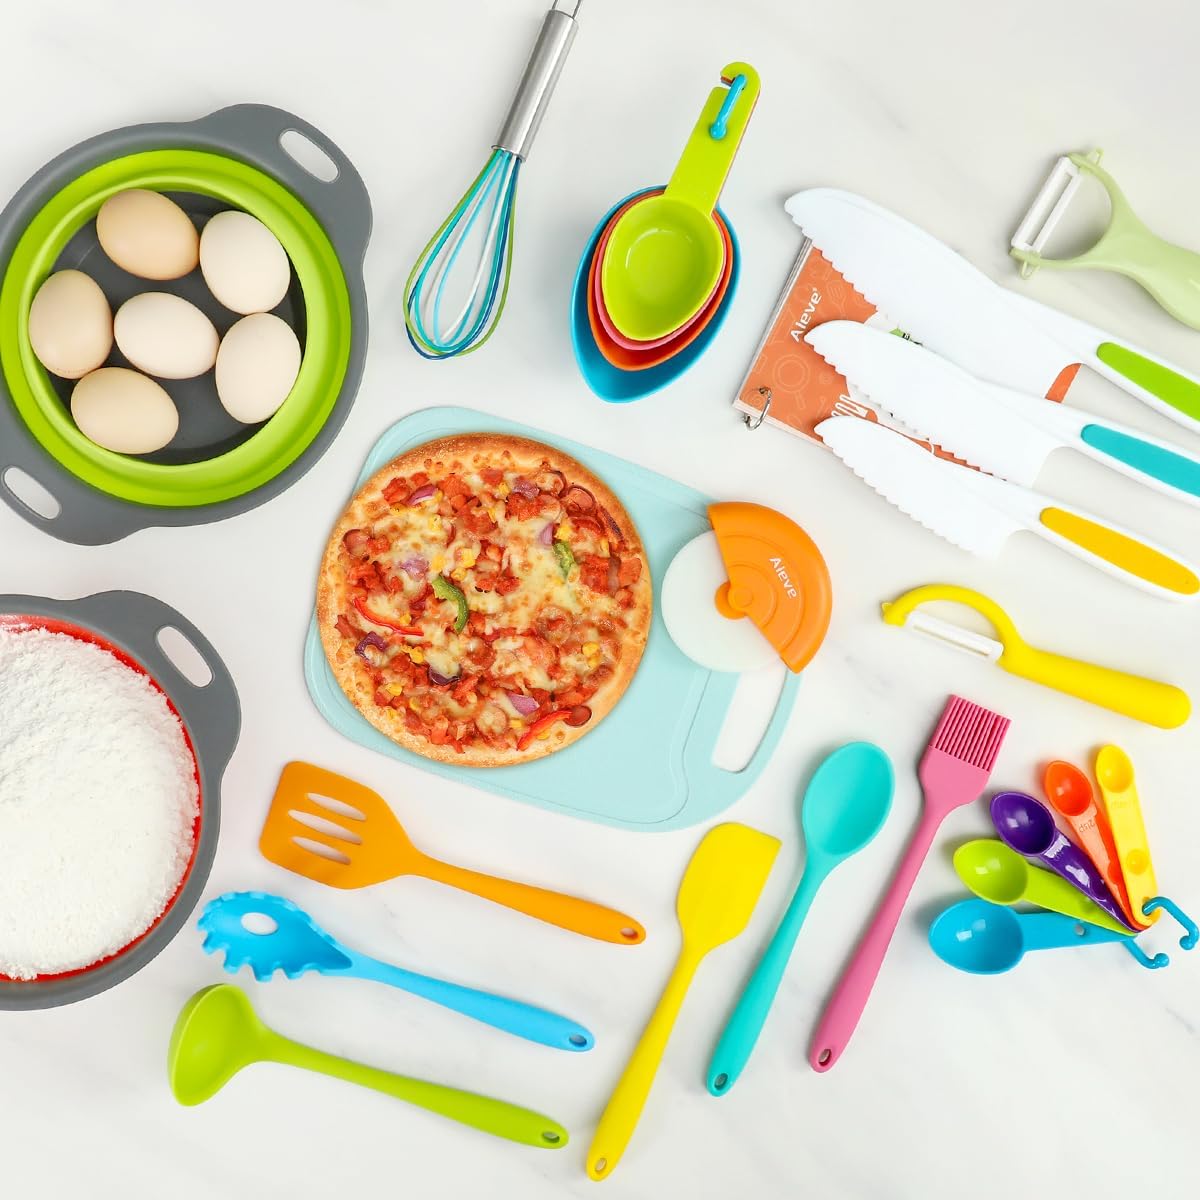 Complete Culinary Experience: Unleash creativity with our kids cooking utensils(28 pack), including a chef’s hat, apron, potato masher, pizza cutter, knife, tiny whisk, peeler, offset spatula, silicone spoon and collapsible mixing bowls for convenient storage and more.